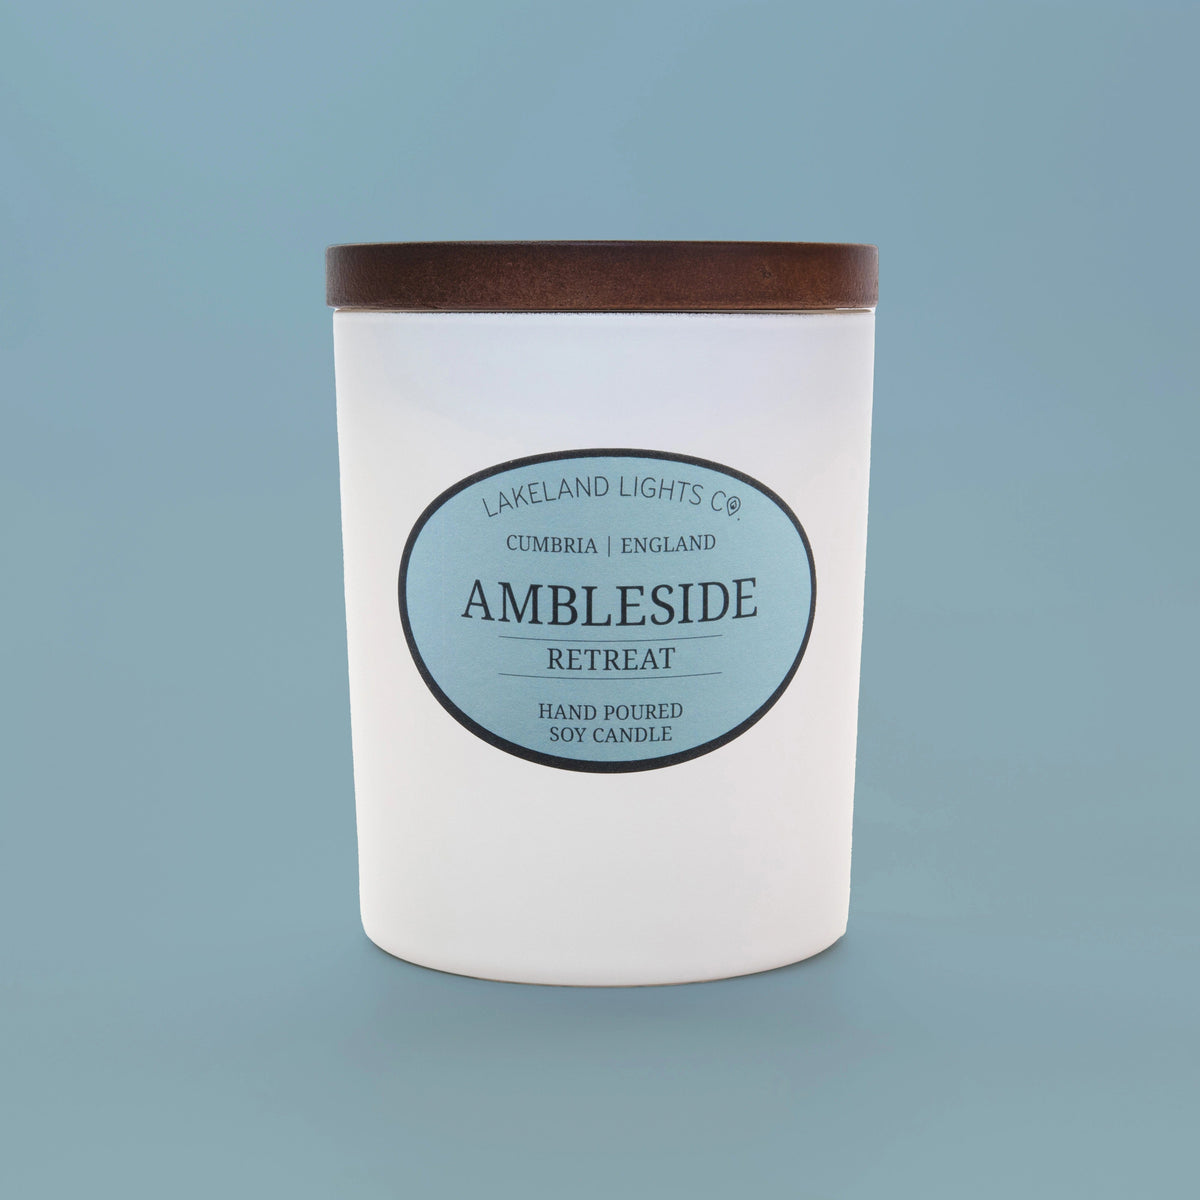 Ambleside Retreat soy candle by Lakeland Lights, featuring lavender, lemon, and jasmine scent, against a light blue background.